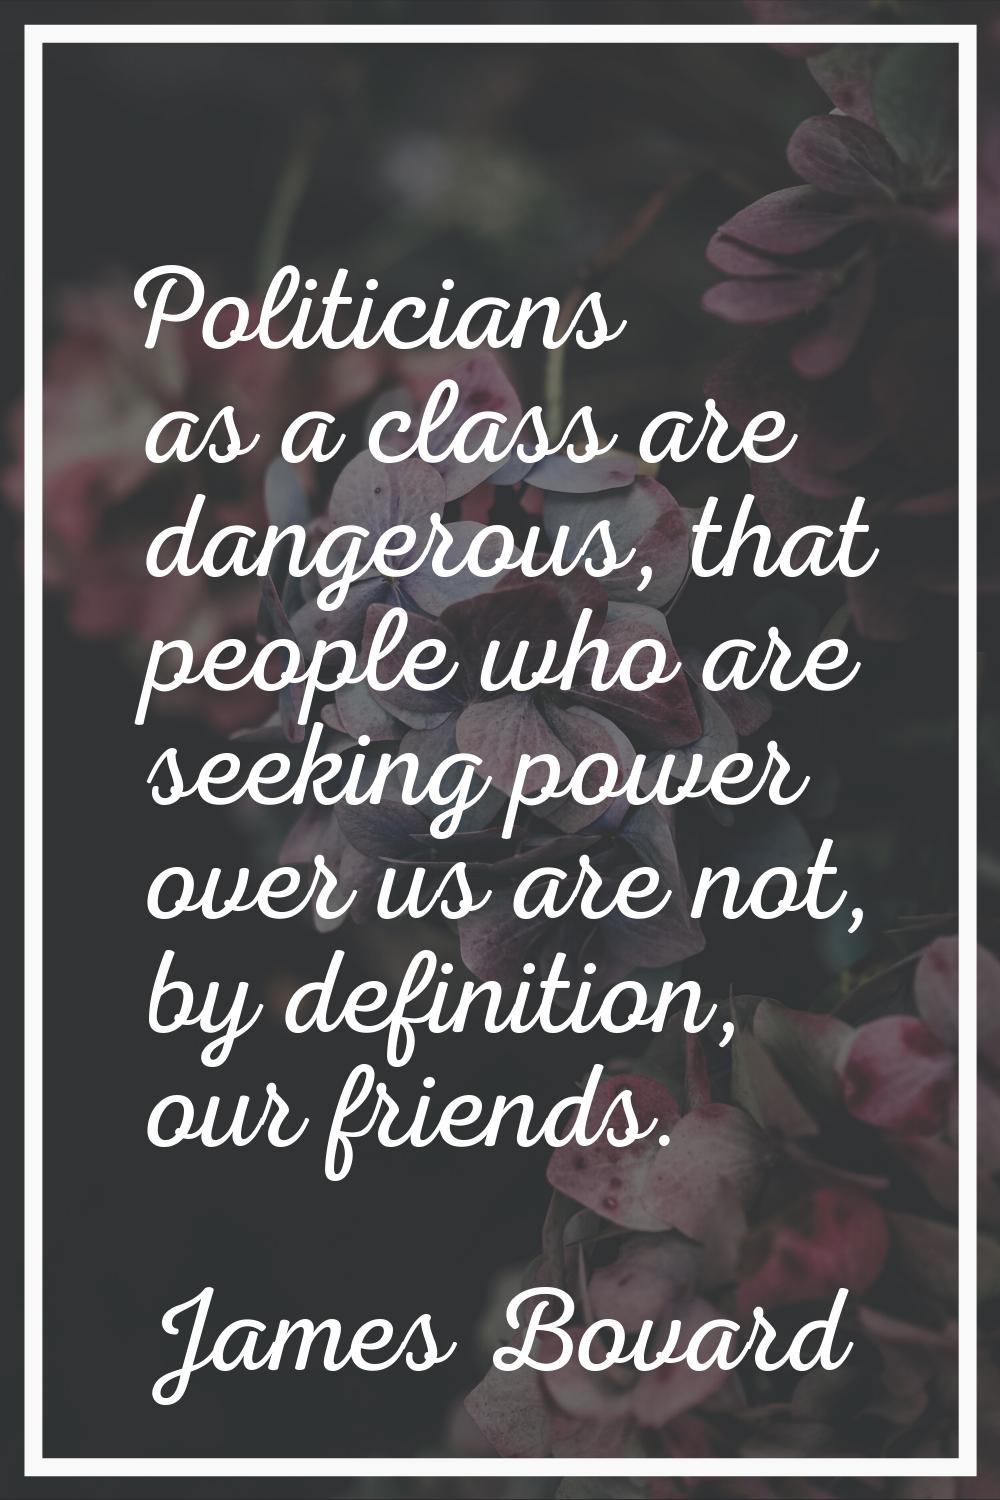 Politicians as a class are dangerous, that people who are seeking power over us are not, by definit